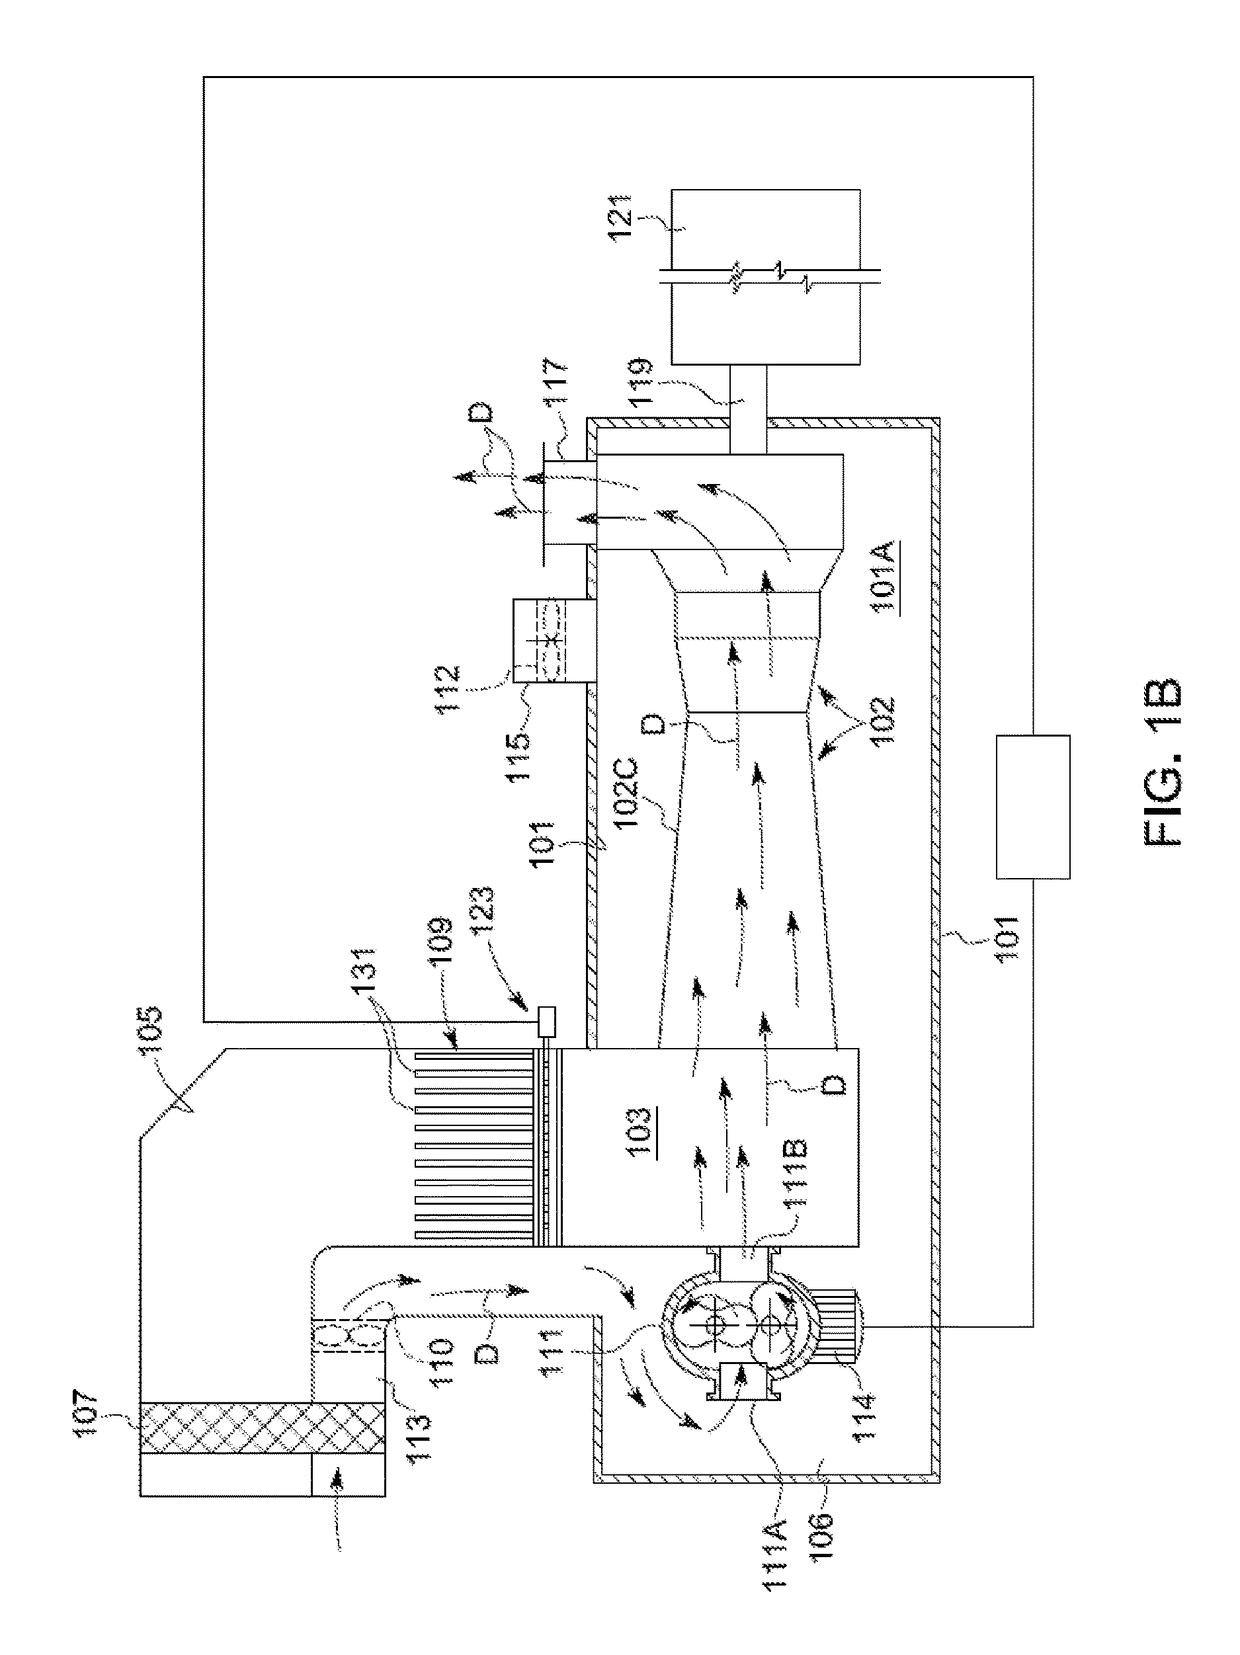 Device and method for gas turbine unlocking